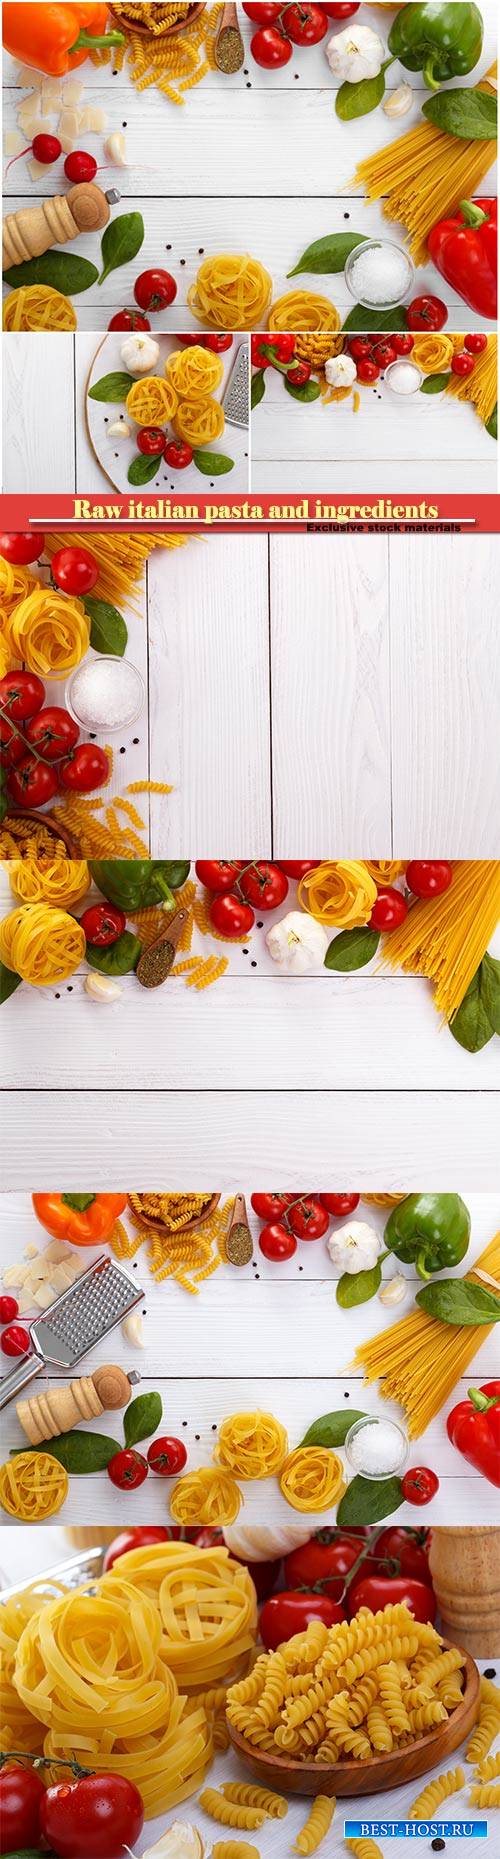 Raw italian pasta and ingredients composition on white wooden board